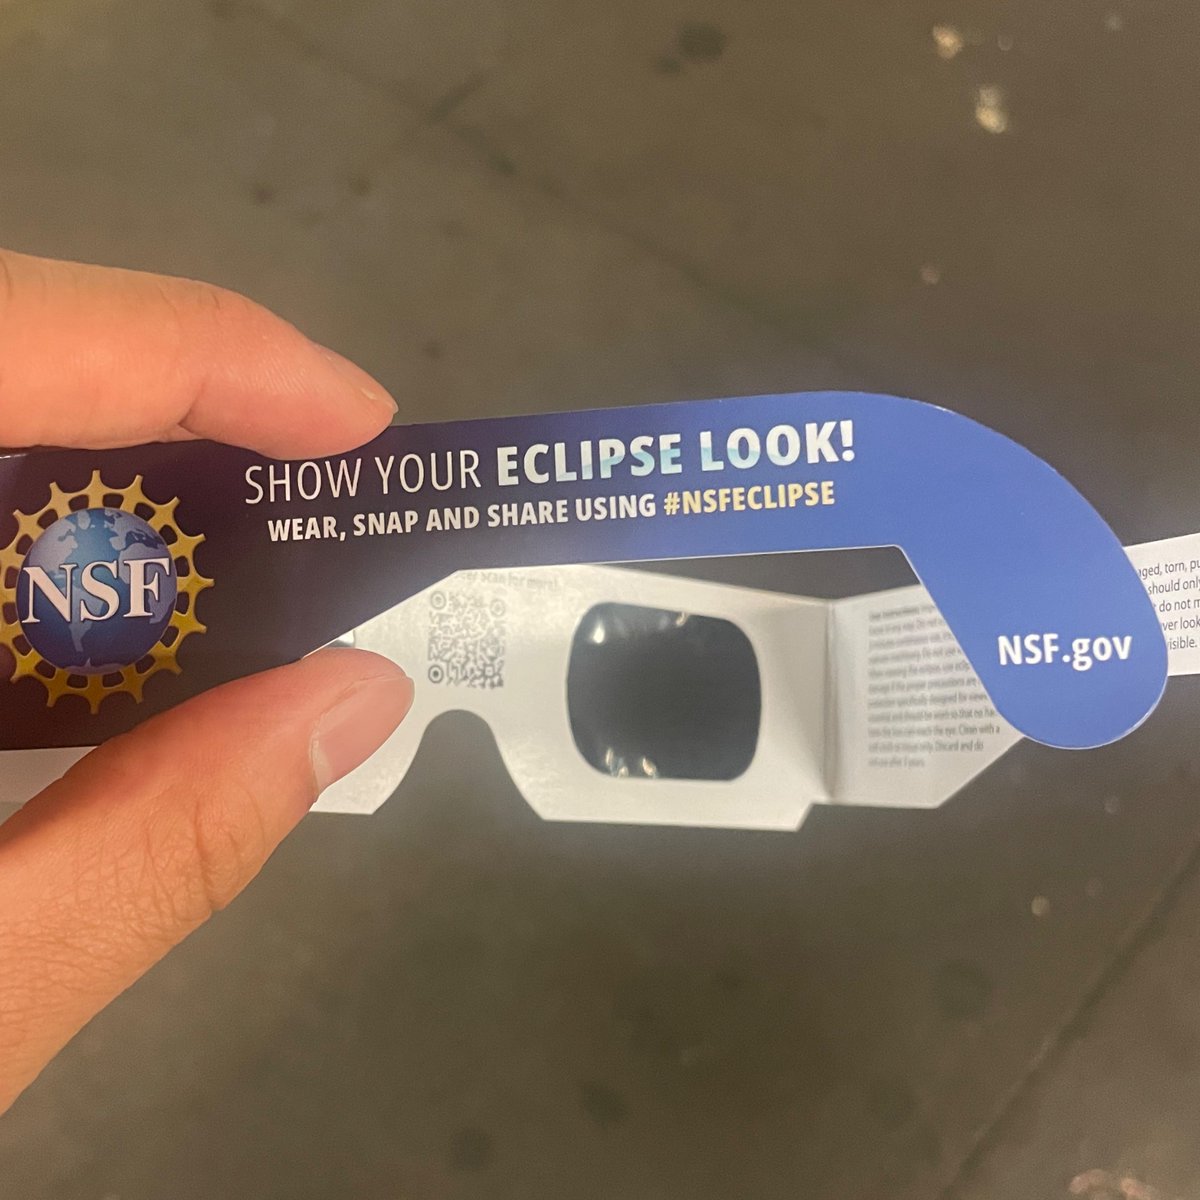 these are the sort of initiatives our tax dollars should be going towards! thank you @NSF @nypl #SolarEclipse2024